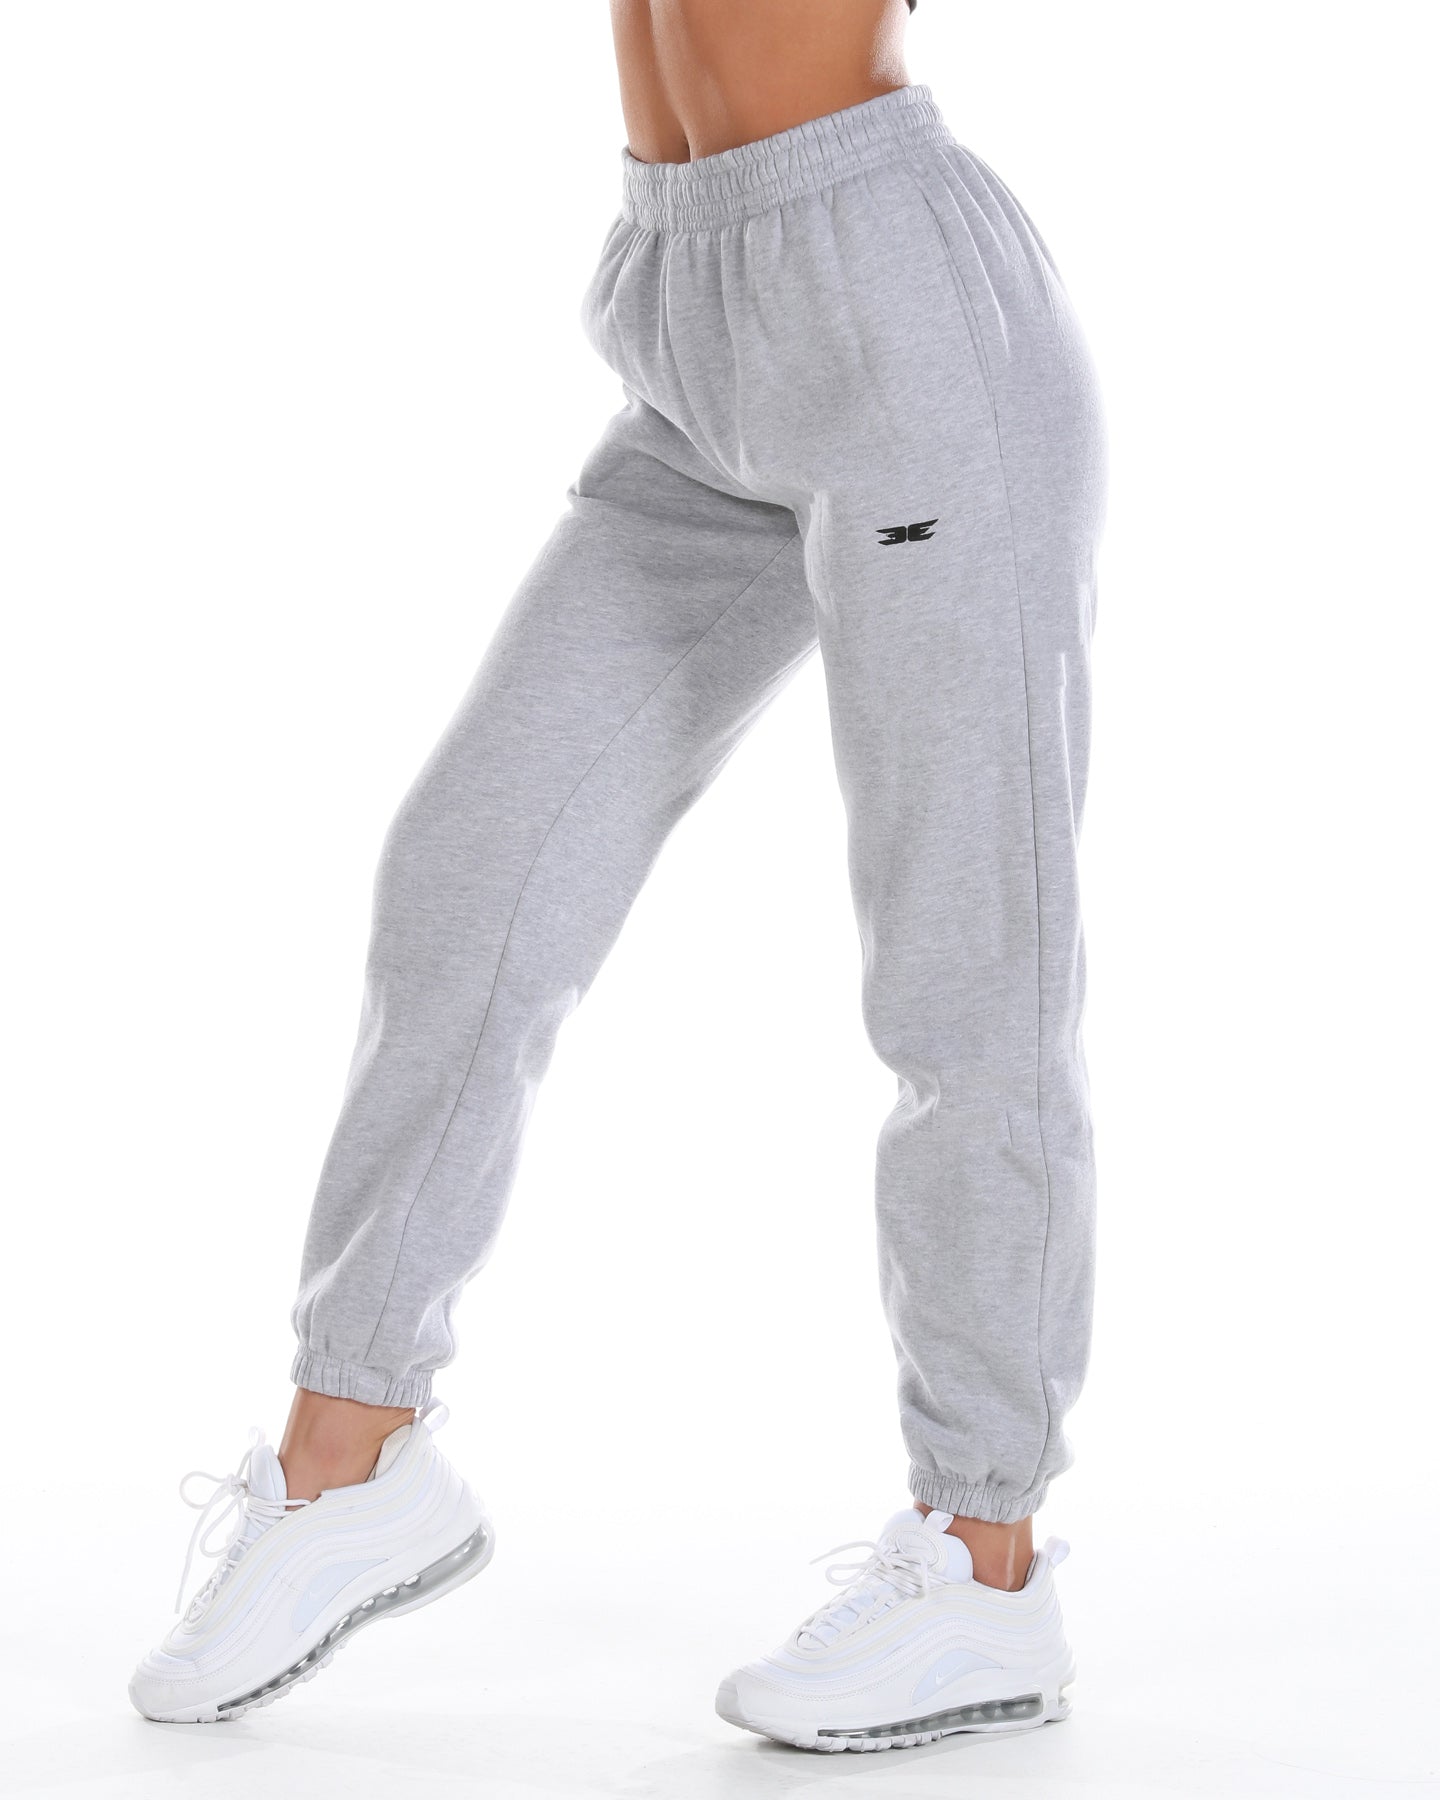 Women's Track Pants - Tracksuits & Trackies